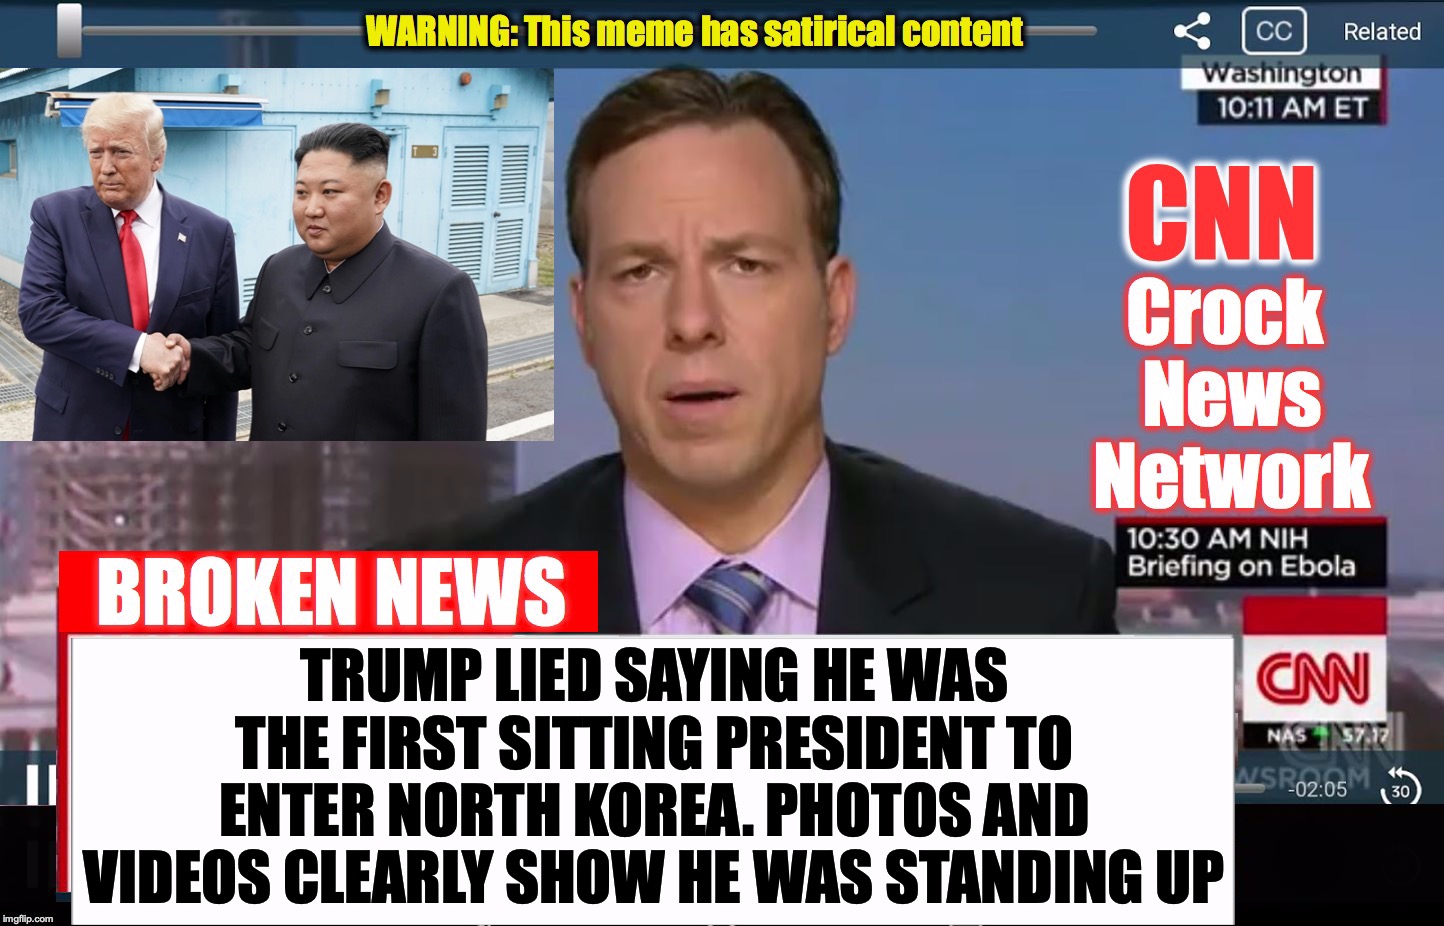 CNN Crock News Network | TRUMP LIED SAYING HE WAS THE FIRST SITTING PRESIDENT TO ENTER NORTH KOREA. PHOTOS AND VIDEOS CLEARLY SHOW HE WAS STANDING UP | image tagged in cnn crock news network | made w/ Imgflip meme maker